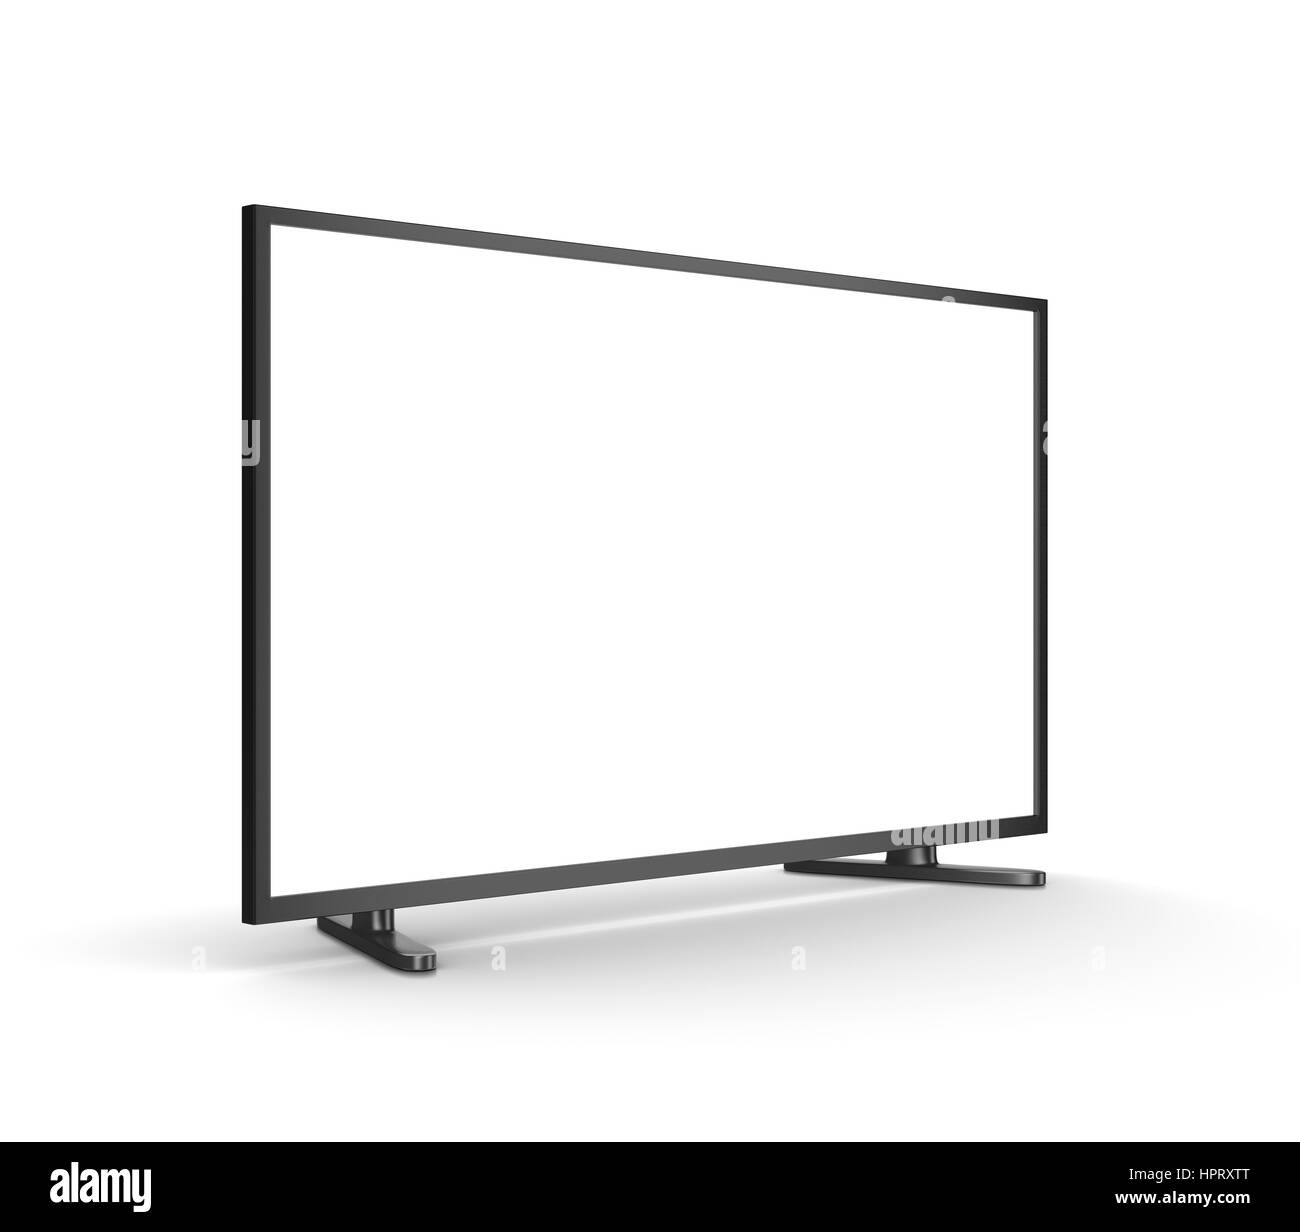 Modern Tv Set with Blank Screen on White Background 3D Illustration Stock Photo